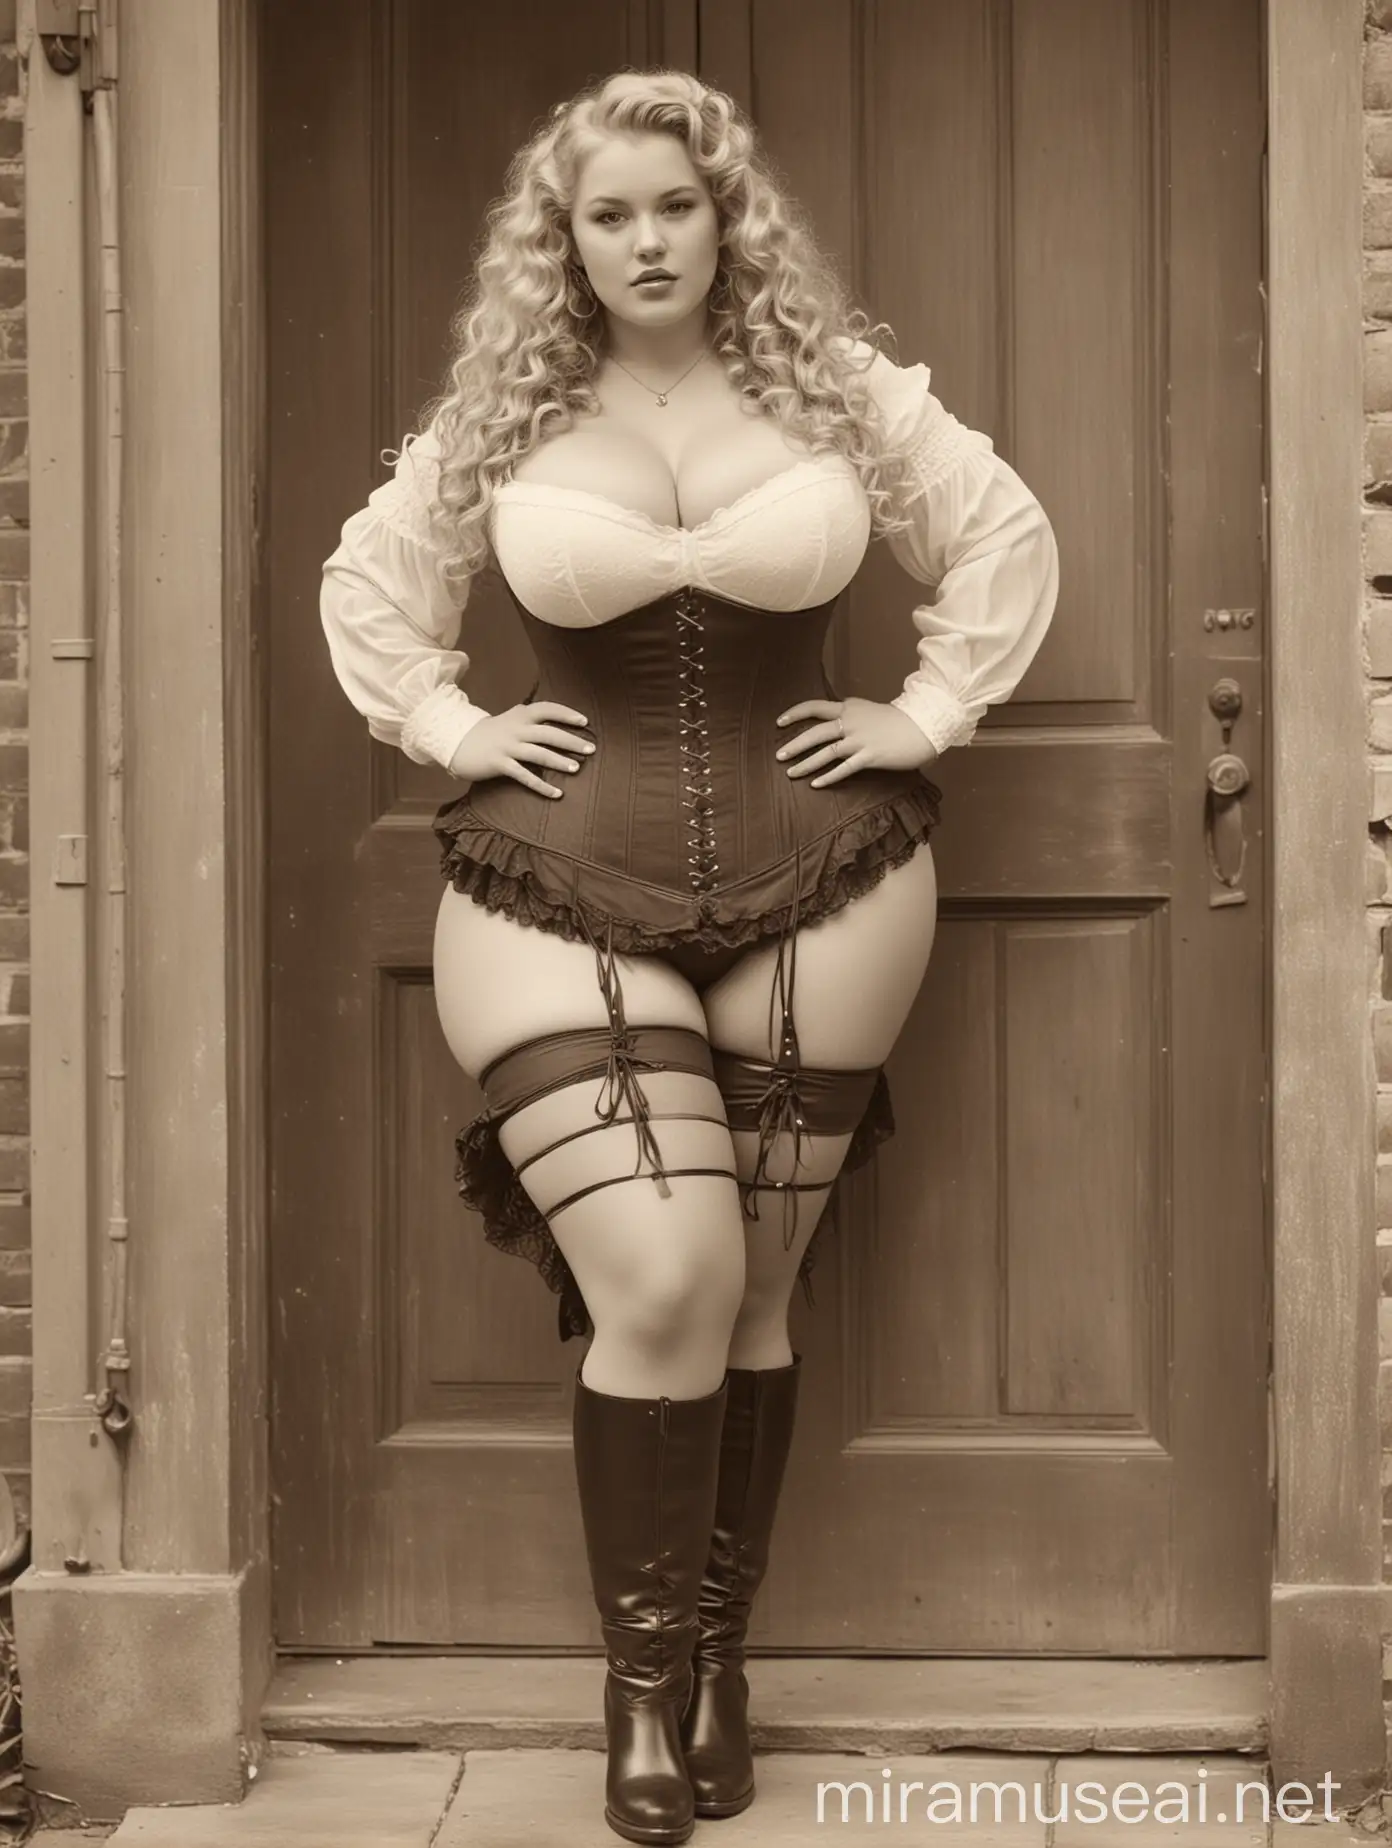 vintage sepia photo of a curvy plus-size woman with huge boobs and long blonde curls, wearing a tight corset, very short skirt and riding boots, standing in Victorian doorway